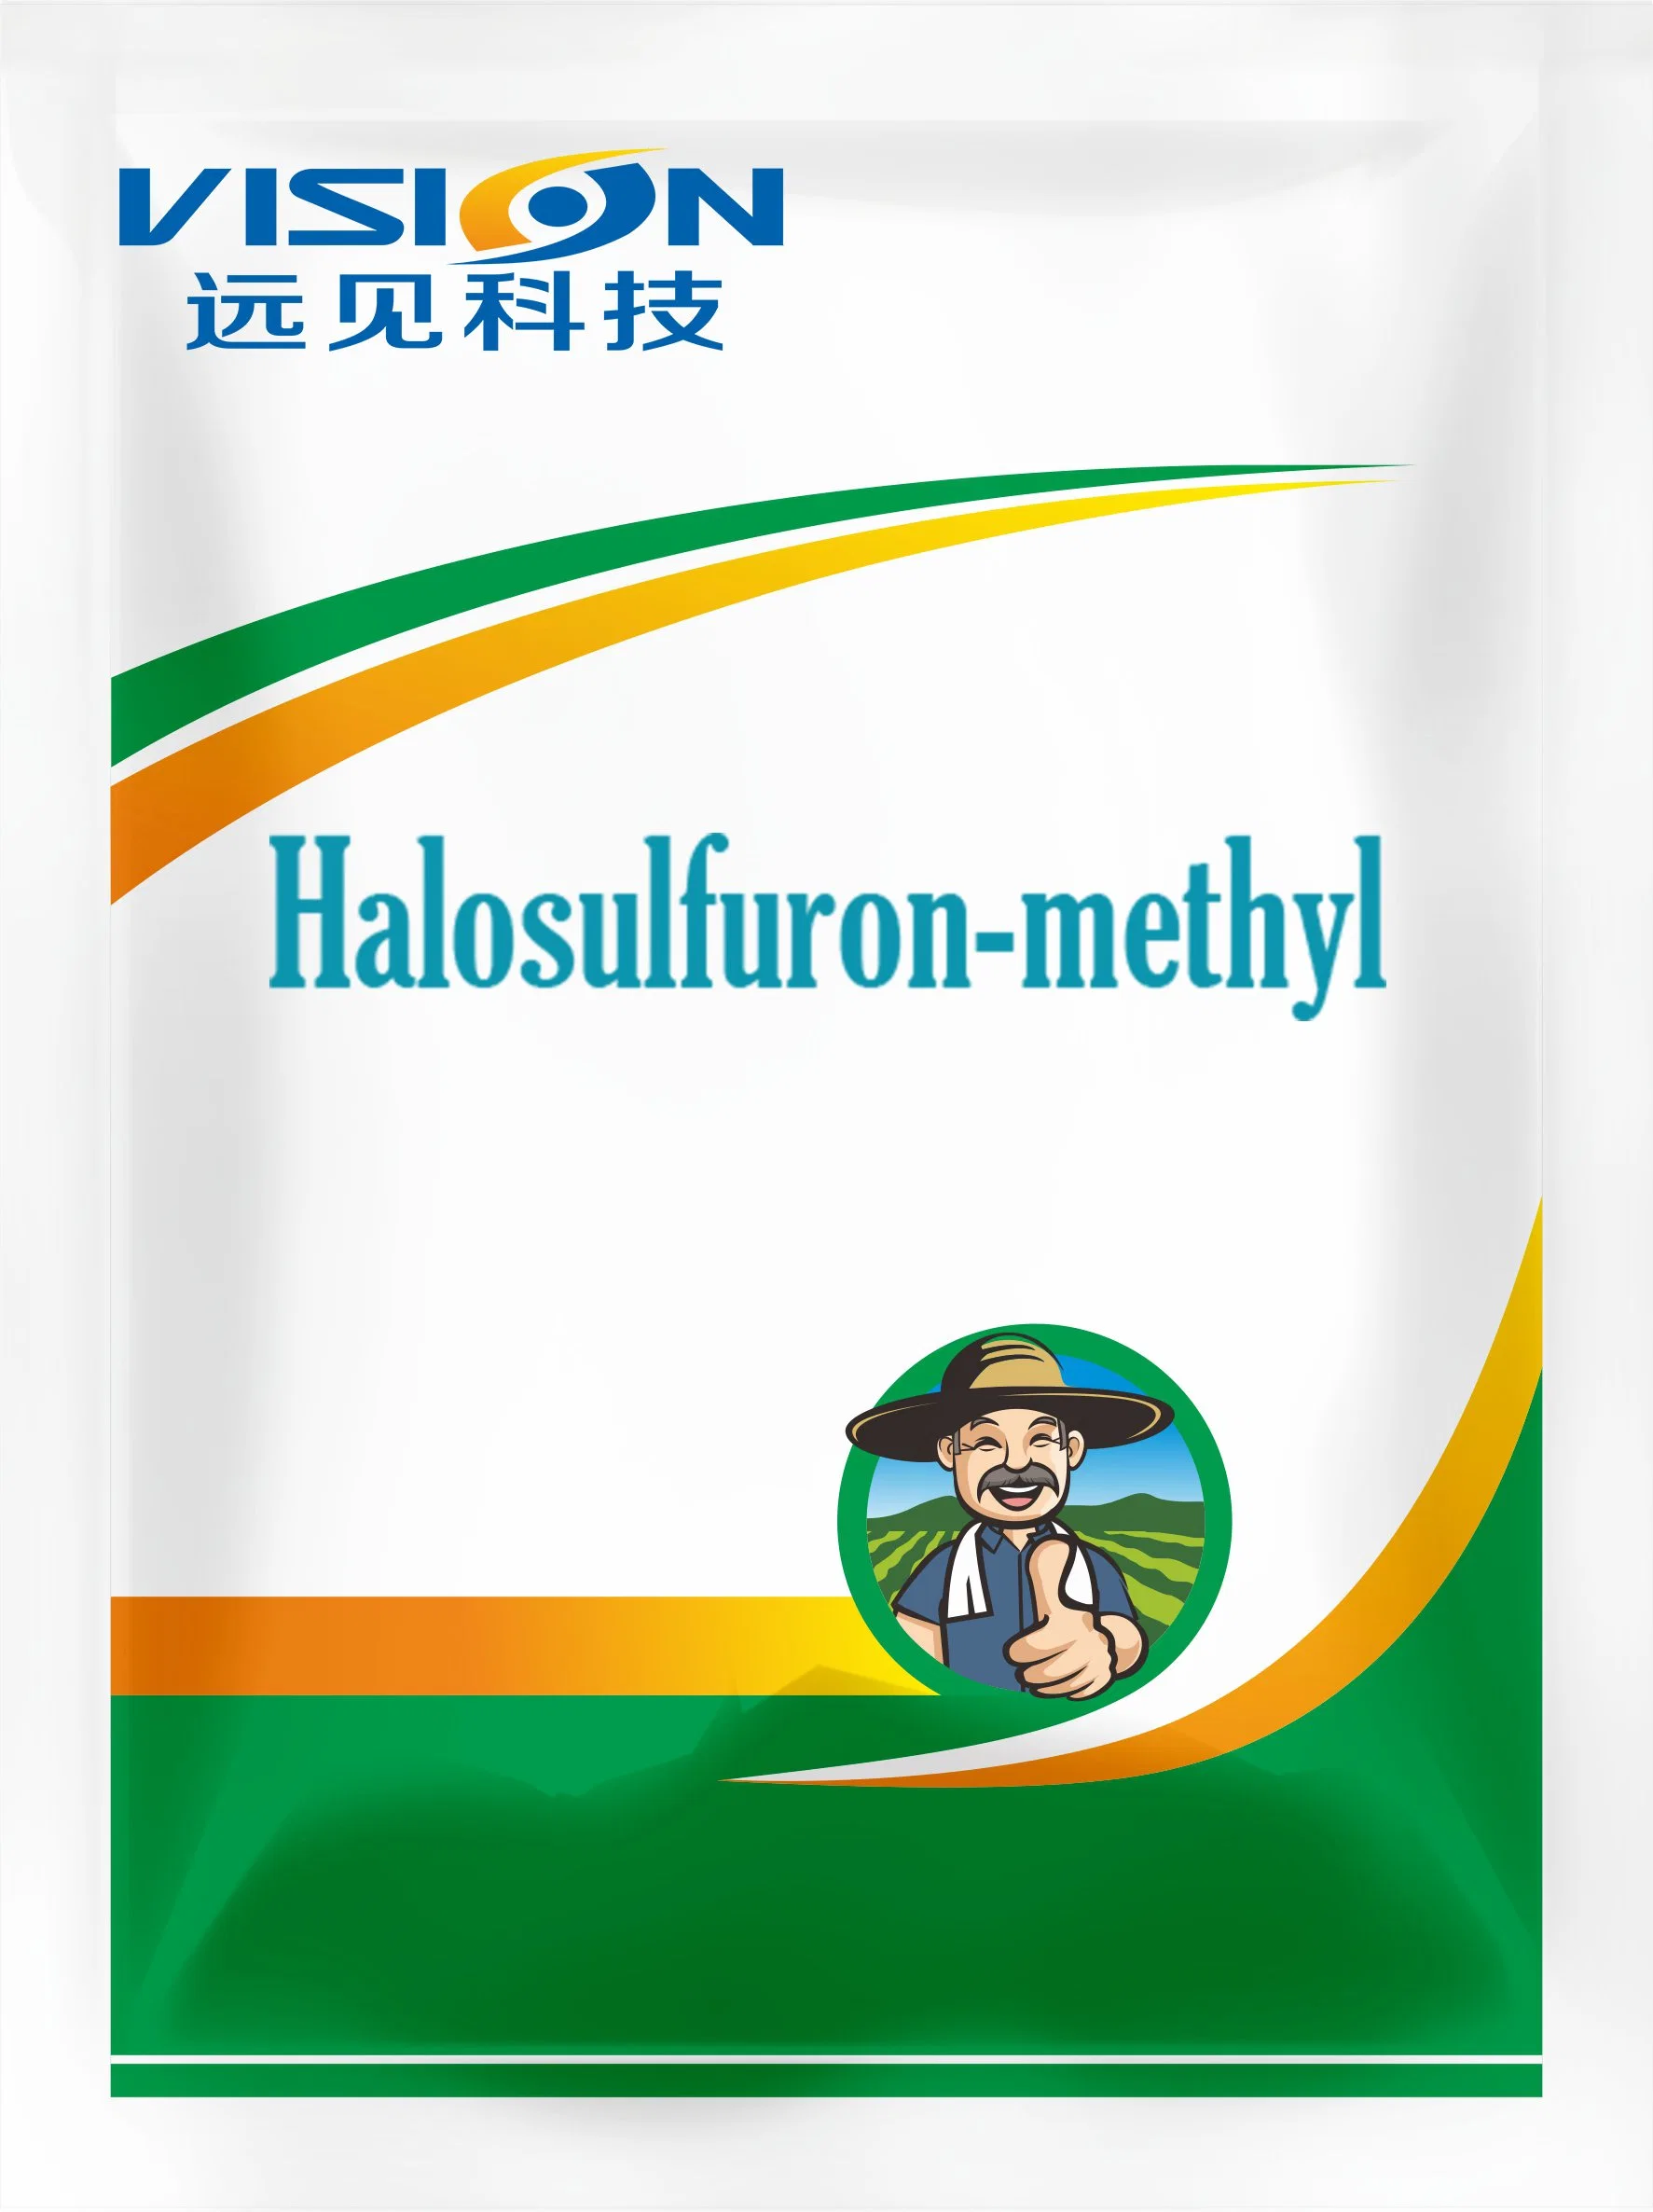 Vision Supply Herbicide Halosulfuron-Methyl 75%Wdg Rice Herbicide Pyrazosulfuron-Ethyl Paddy Herbicides for Agriculture